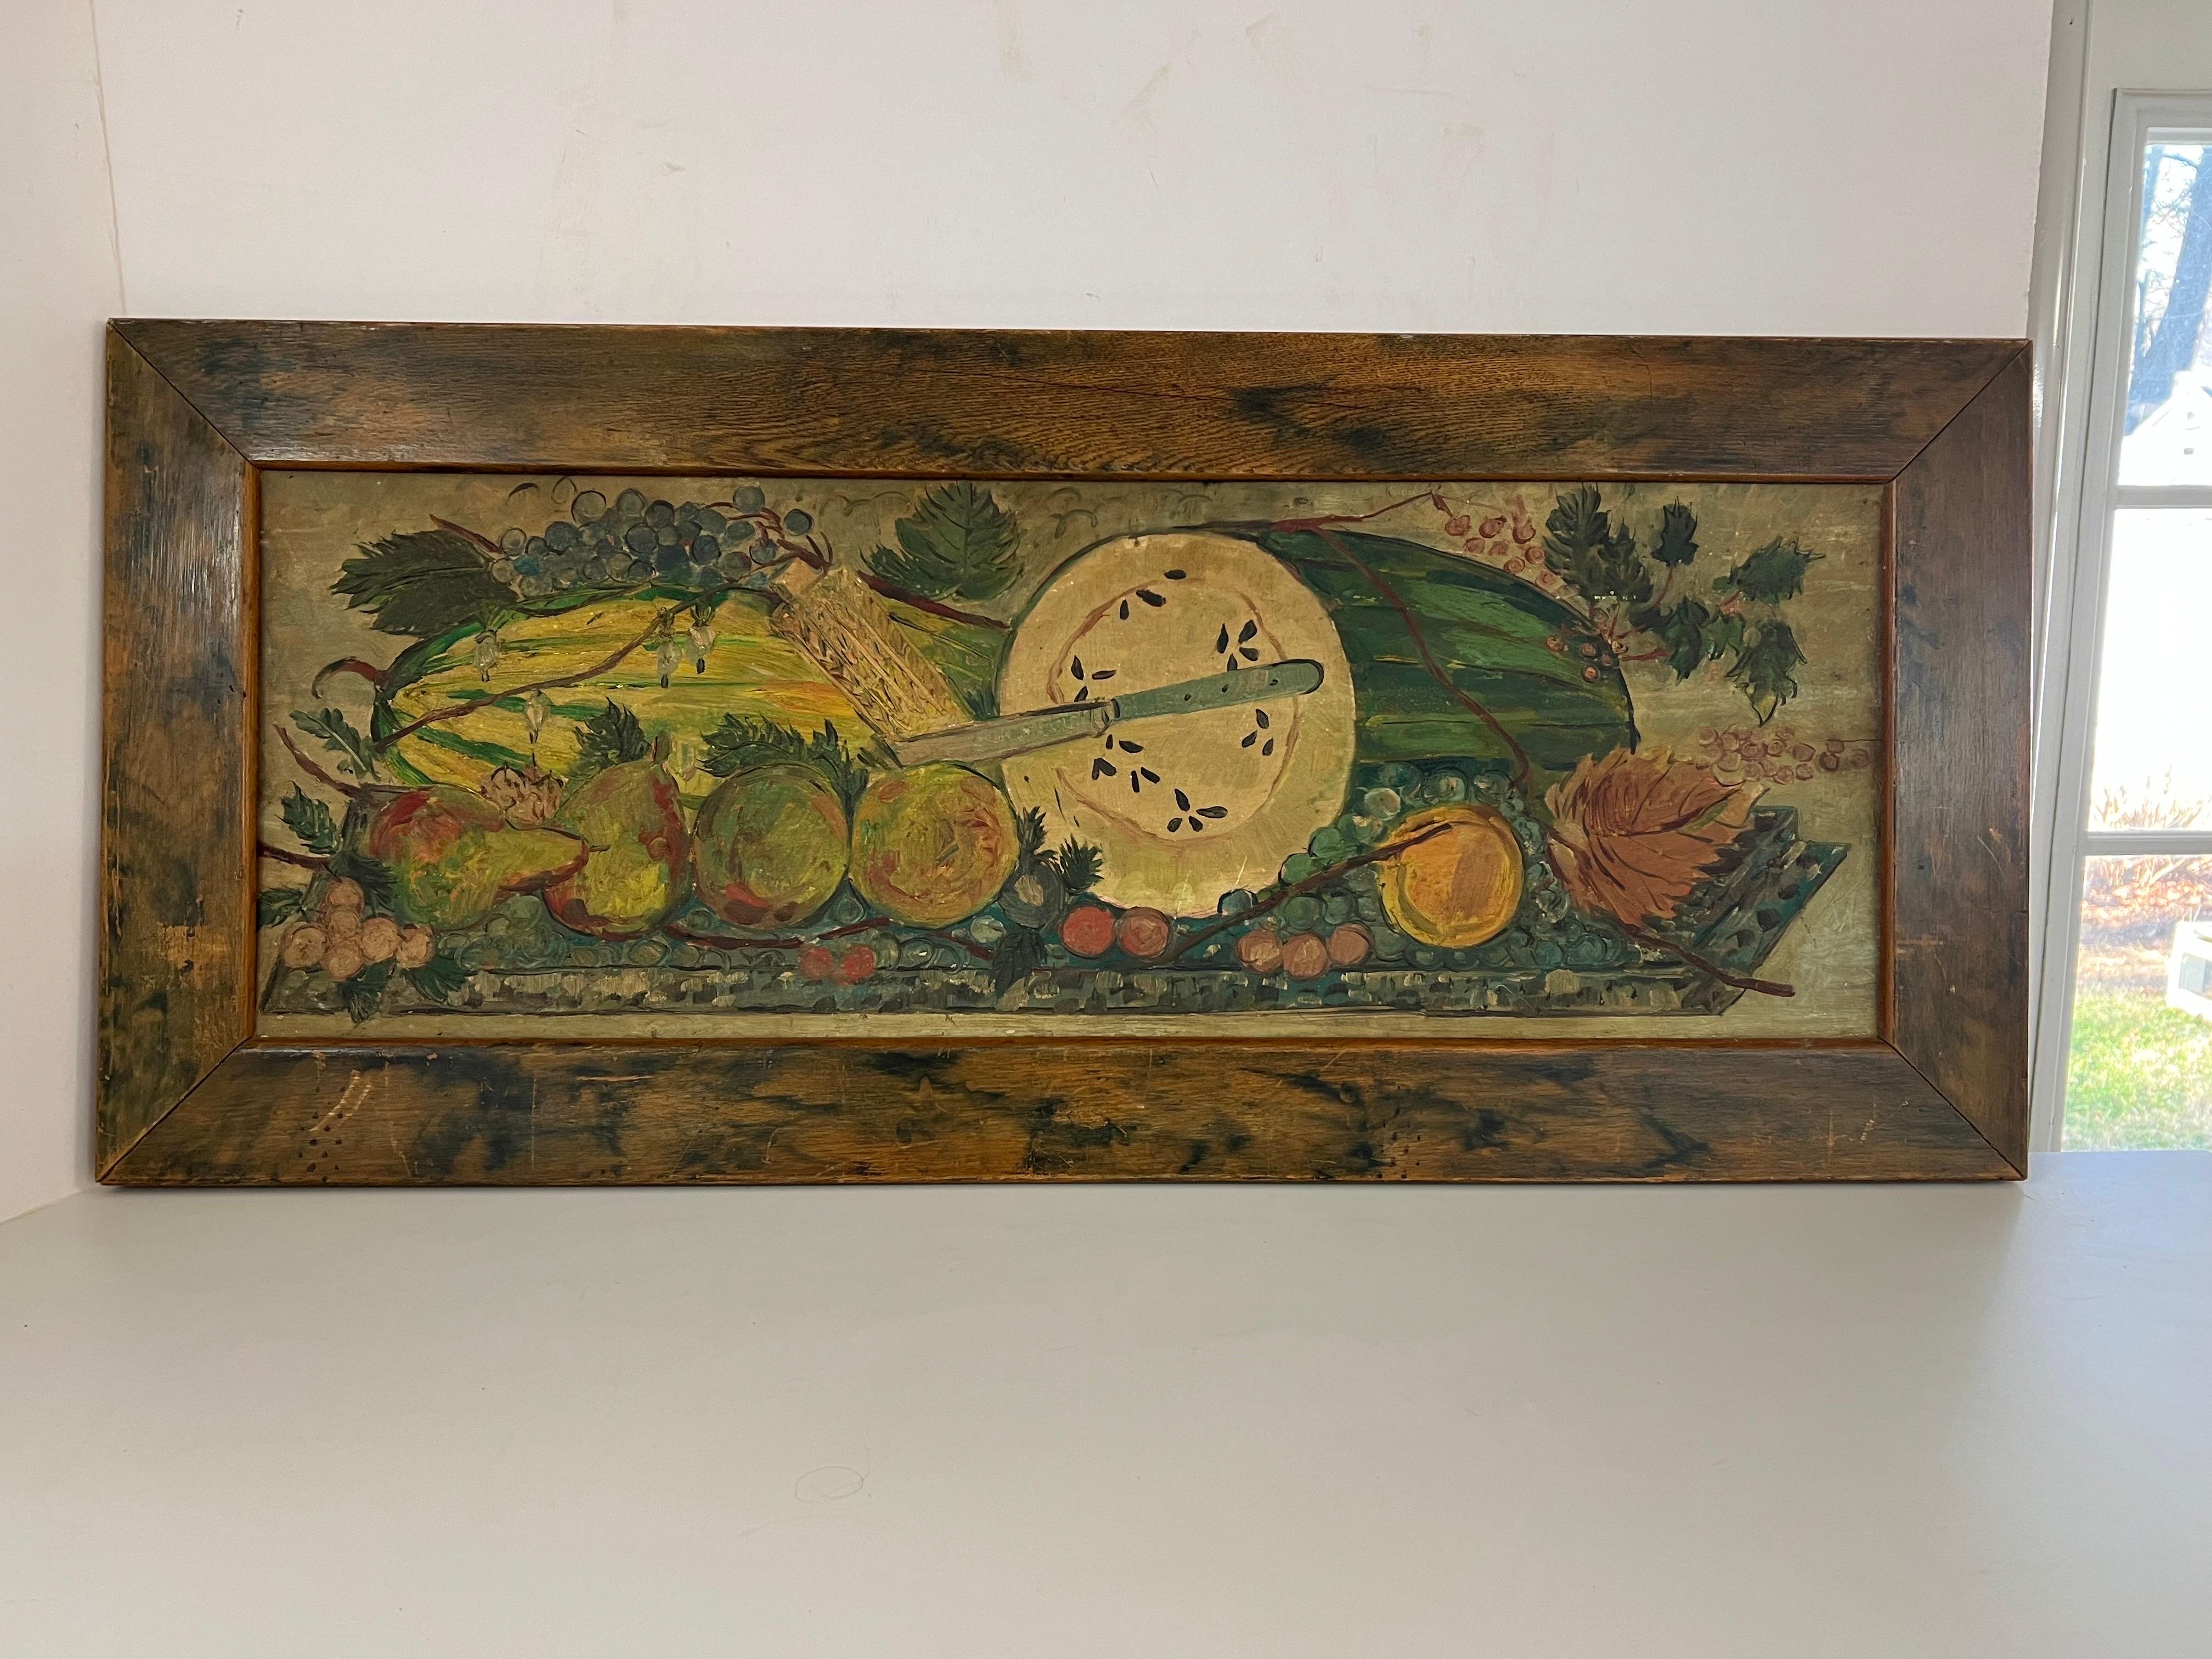 Antique Impasto Fruit Still Life on Board. Gorgeous hand painted wooden frame to match the coloring of this heavy impasto fruit still life. Perfect piece of original Fold Art for that country home to give the walls some color and some warmth.
